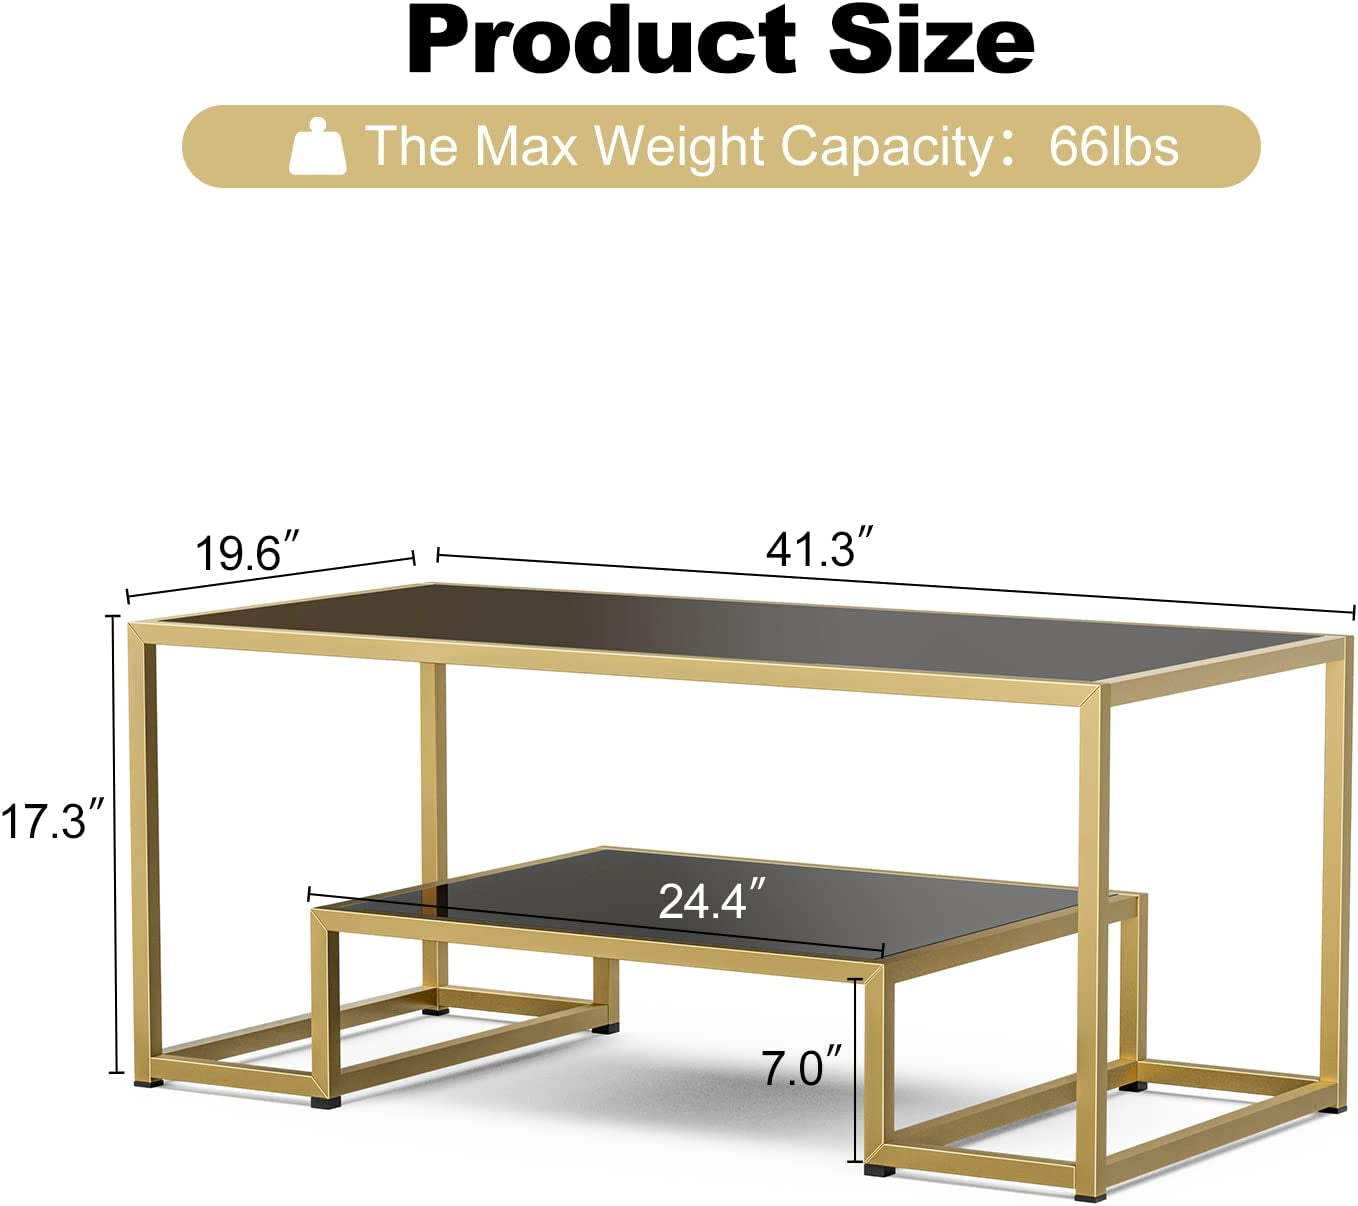 "Contemporary Black Coffee Table with Gold Metal Frame, Open Storage Shelf, and Modern Design - Ideal for Living Rooms, Offices, and Home Decor"